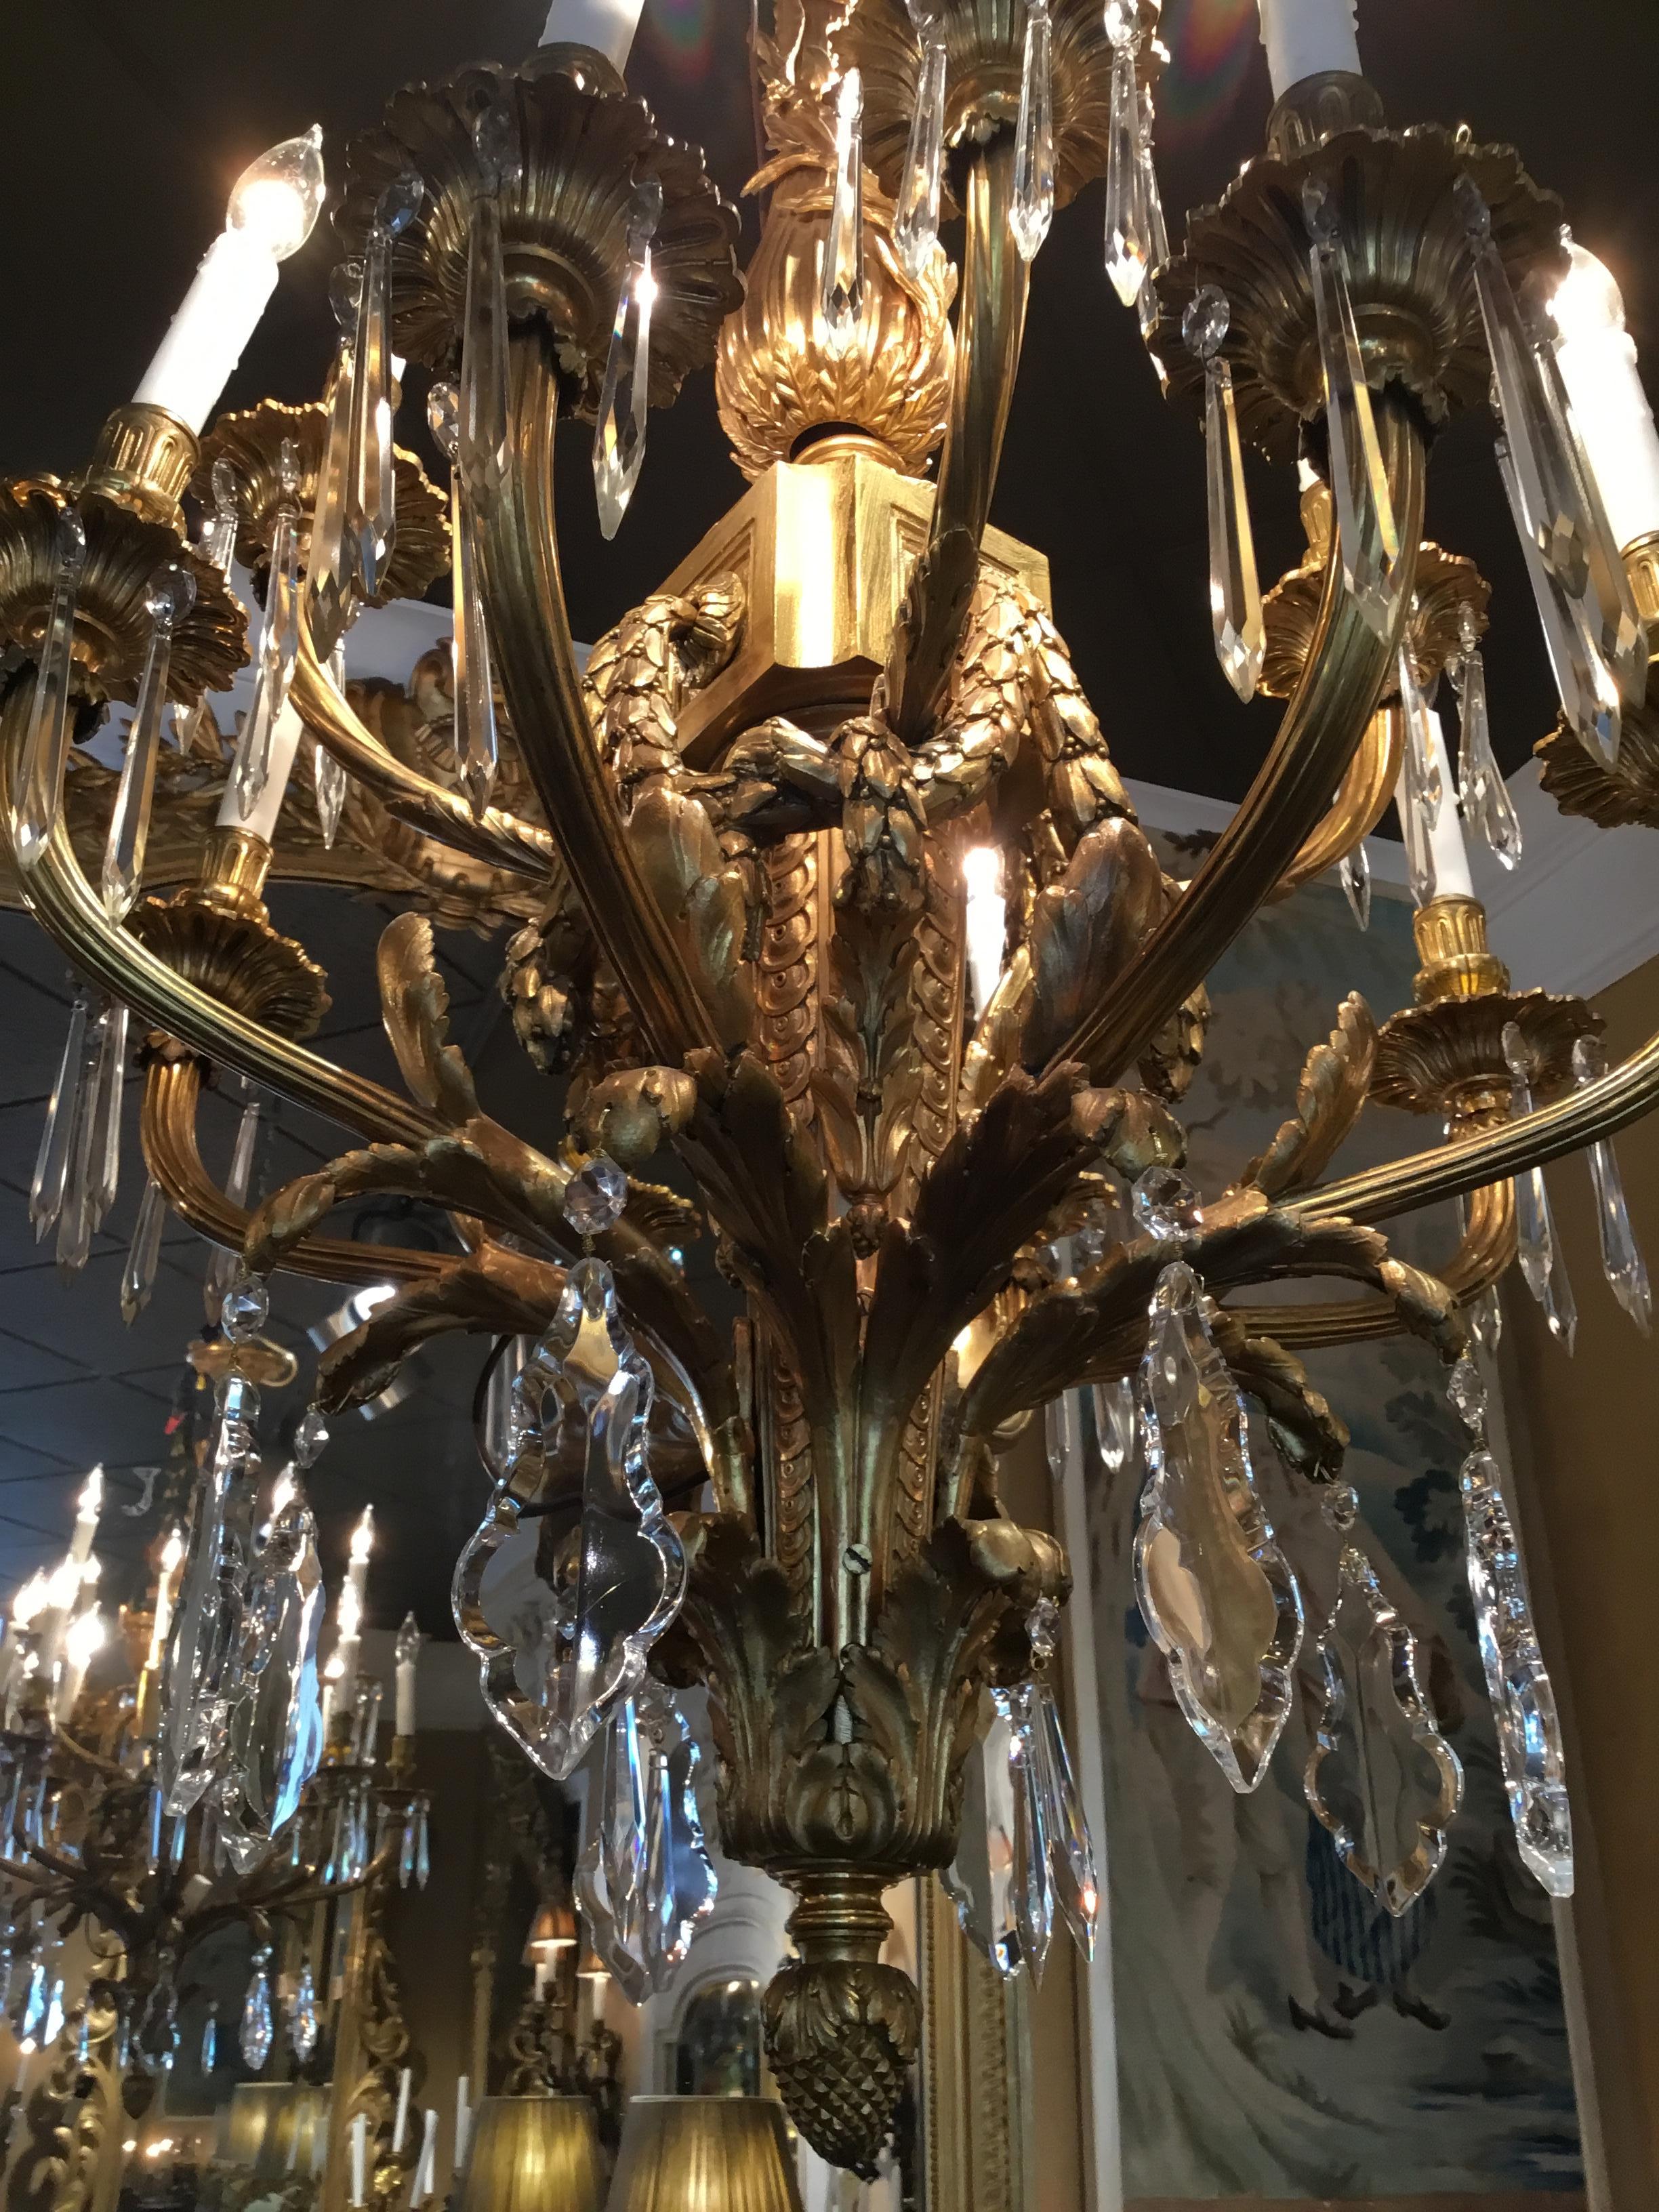 Exquisite gilt bronze chandelier with a rectangular stem cast with vertical
bands issuing acanthus leaves supporting serpentine
reeded branches ending in circular bobeches and vasiform nozzles
beneath a paneled block form capital suspending